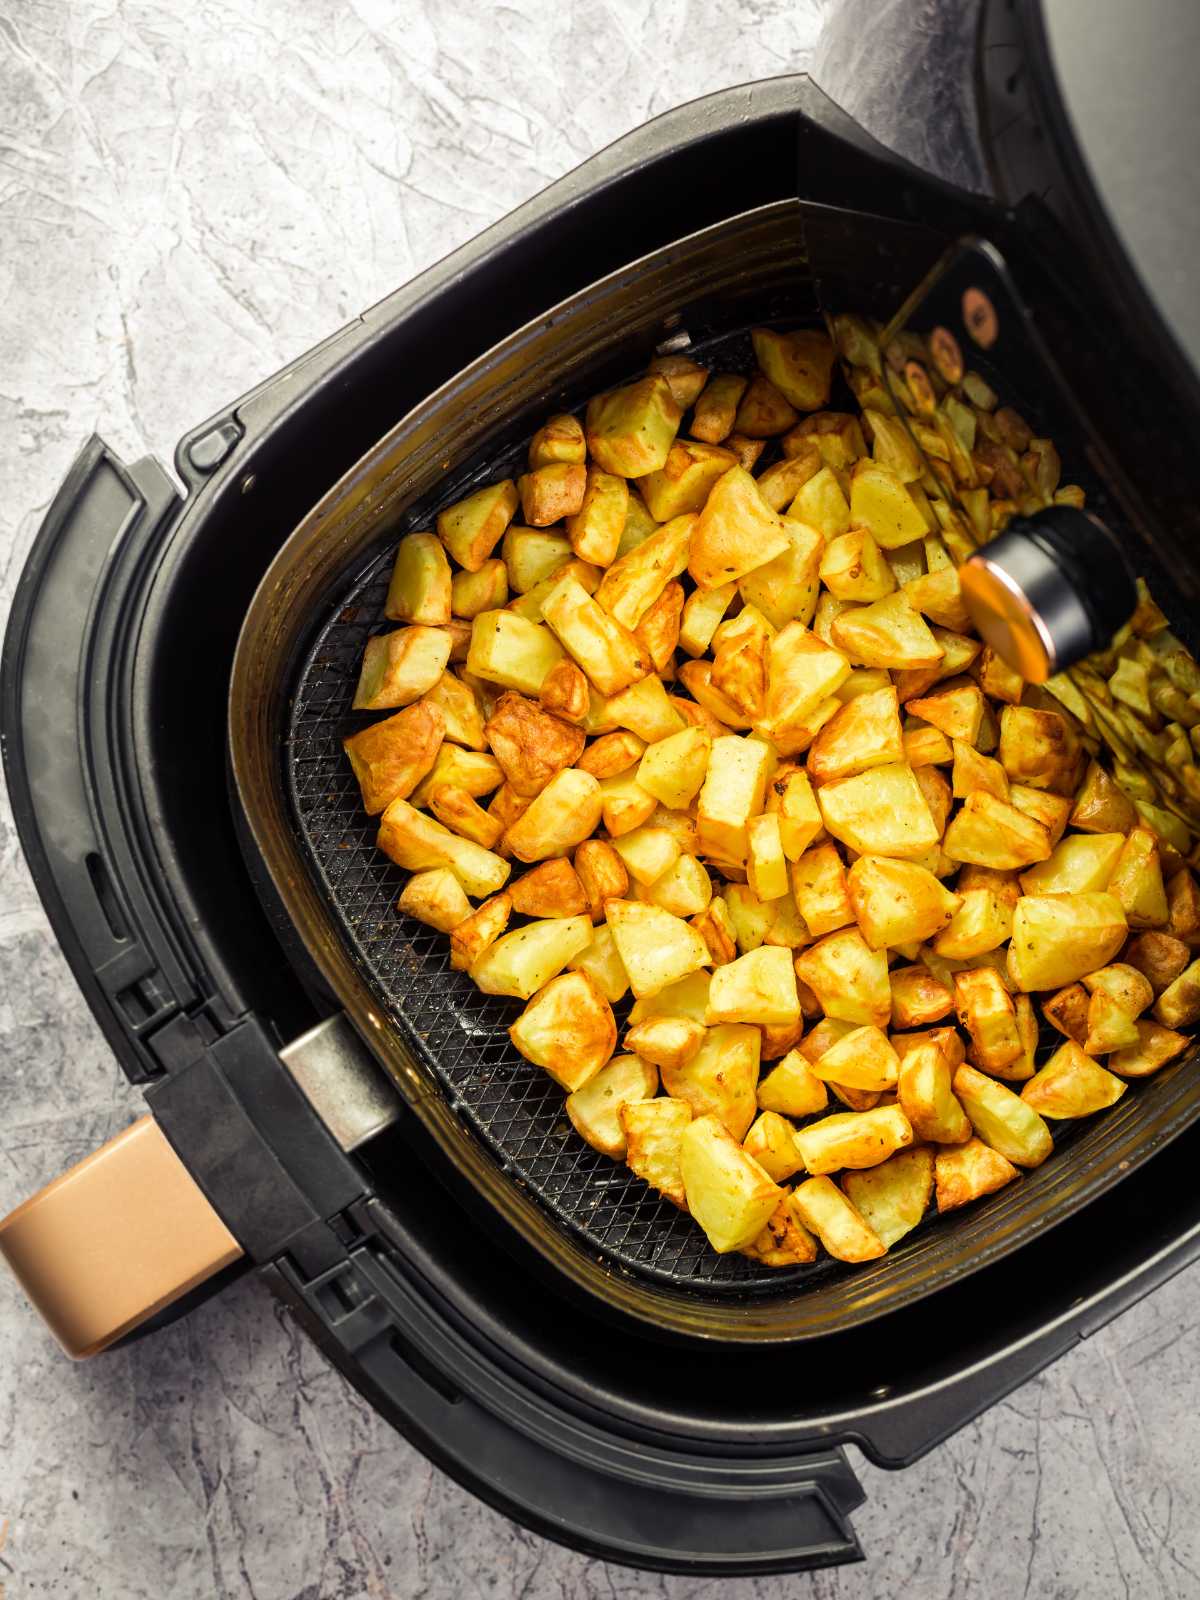 Can You Put Water in an Air Fryer? Here’s What You Should Know